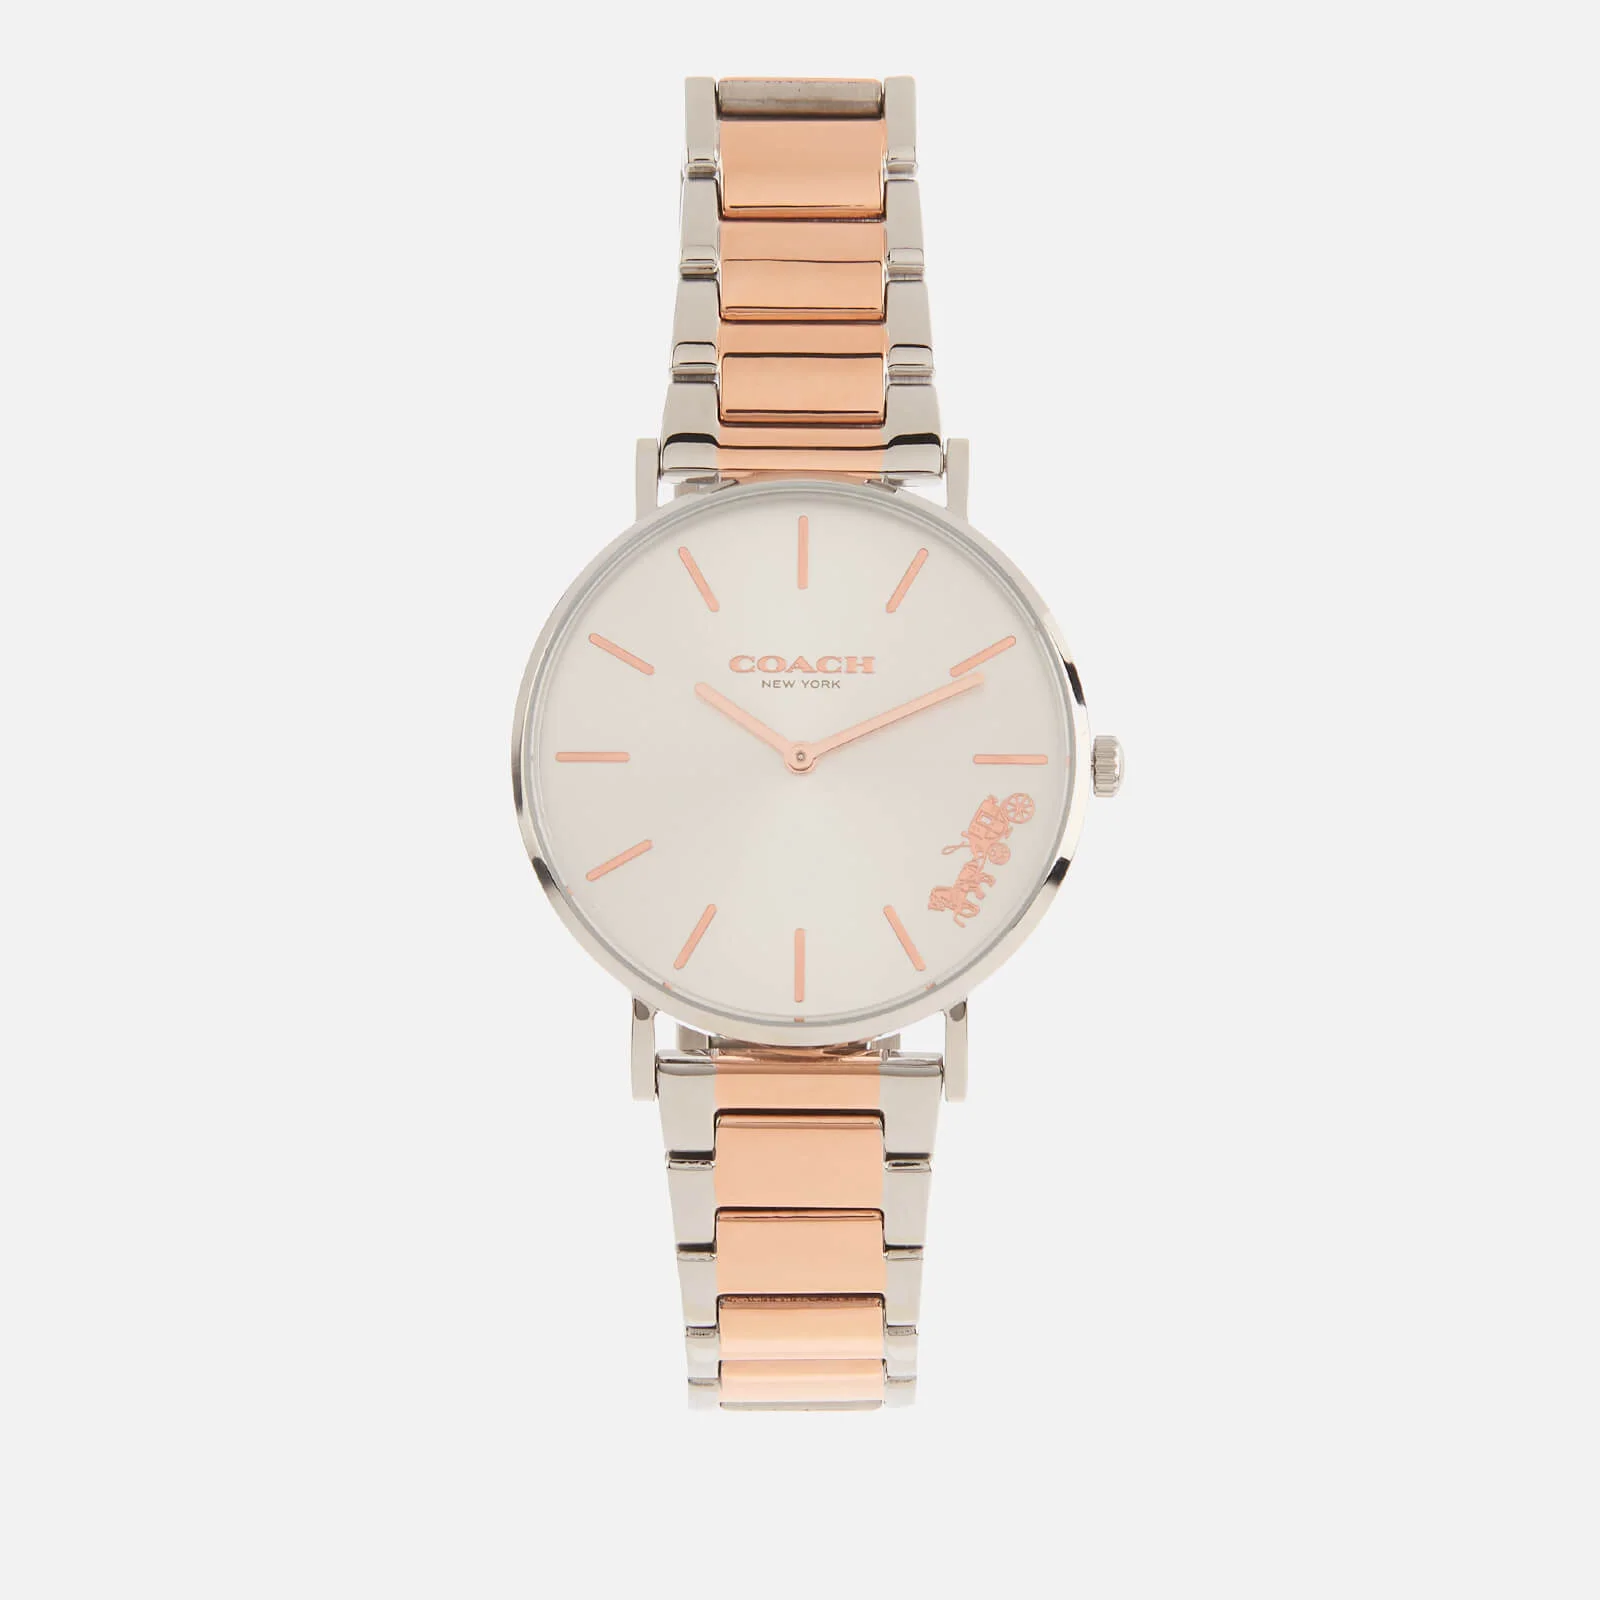 Coach Women's Perry Metal Strap Watch - Silver/Pink Image 1